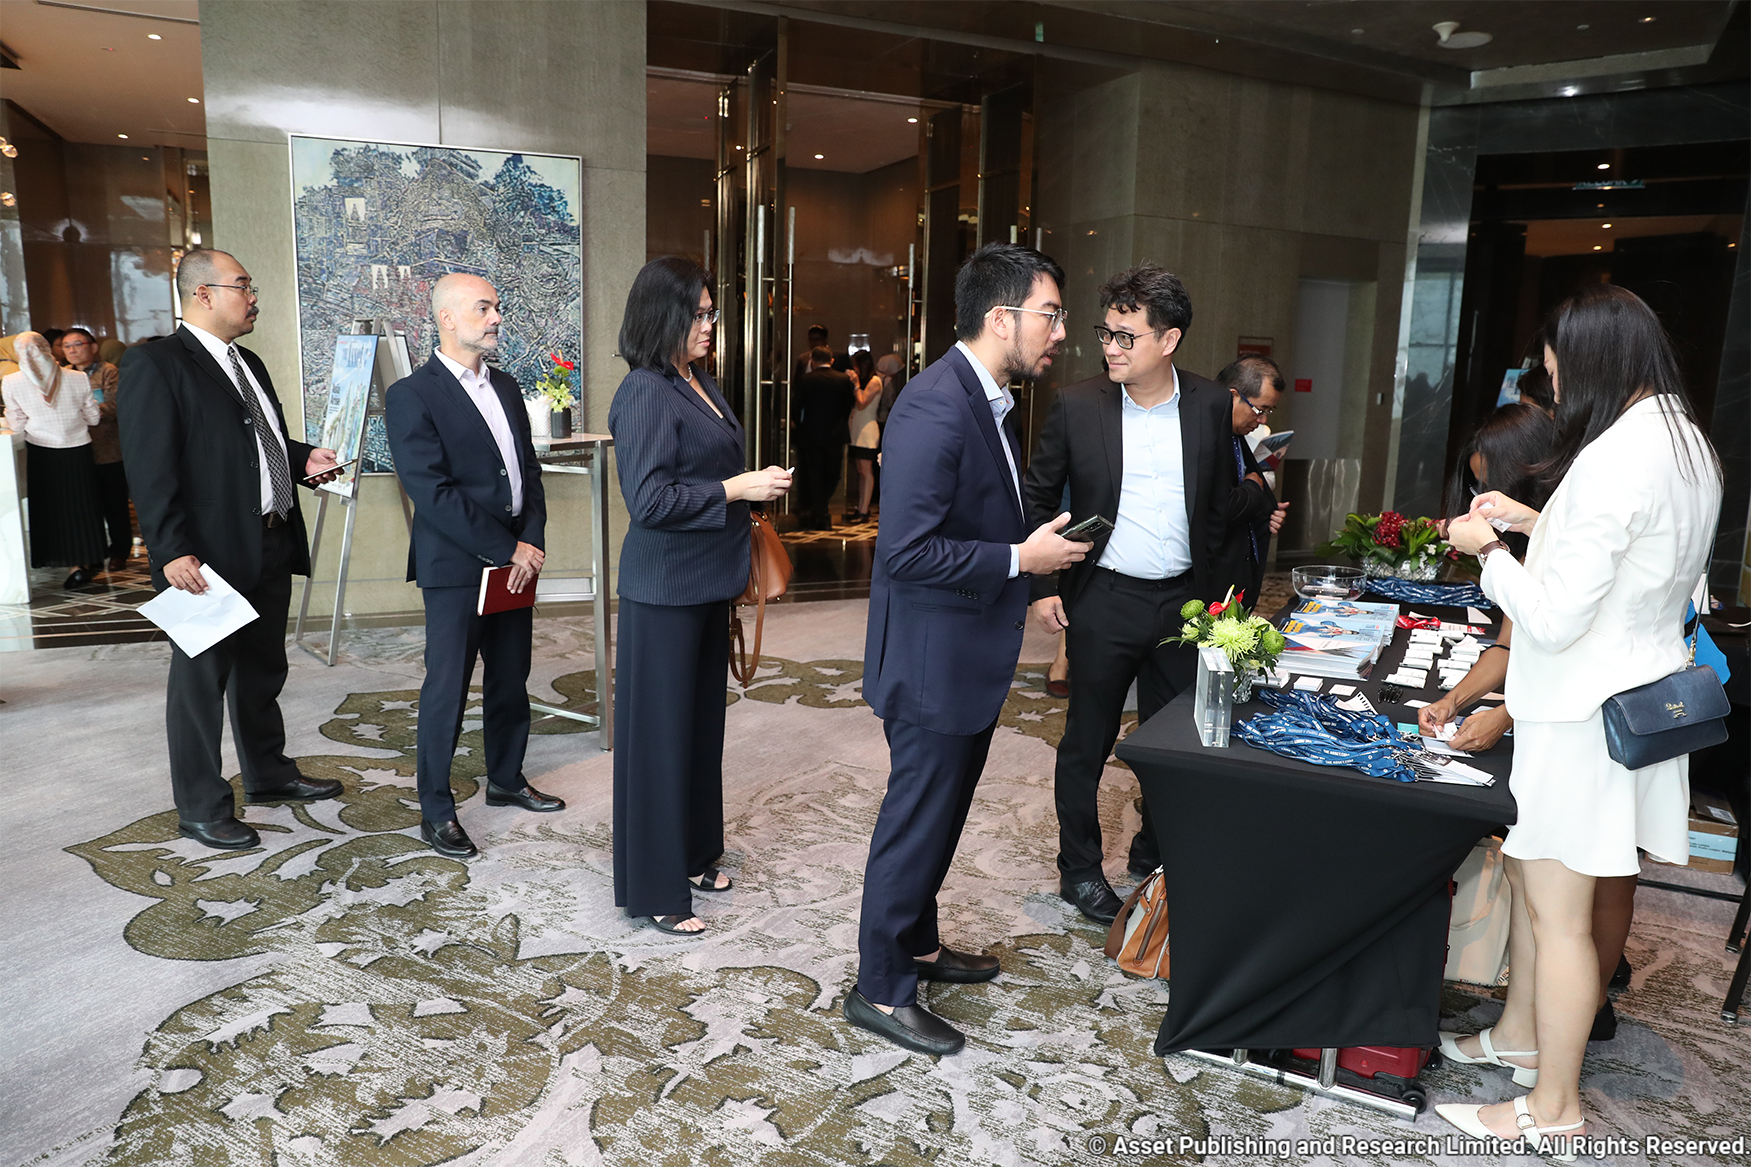 Registration time at the 6th Global Islamic Finance Issuers and Investors Leadership Dialogue 